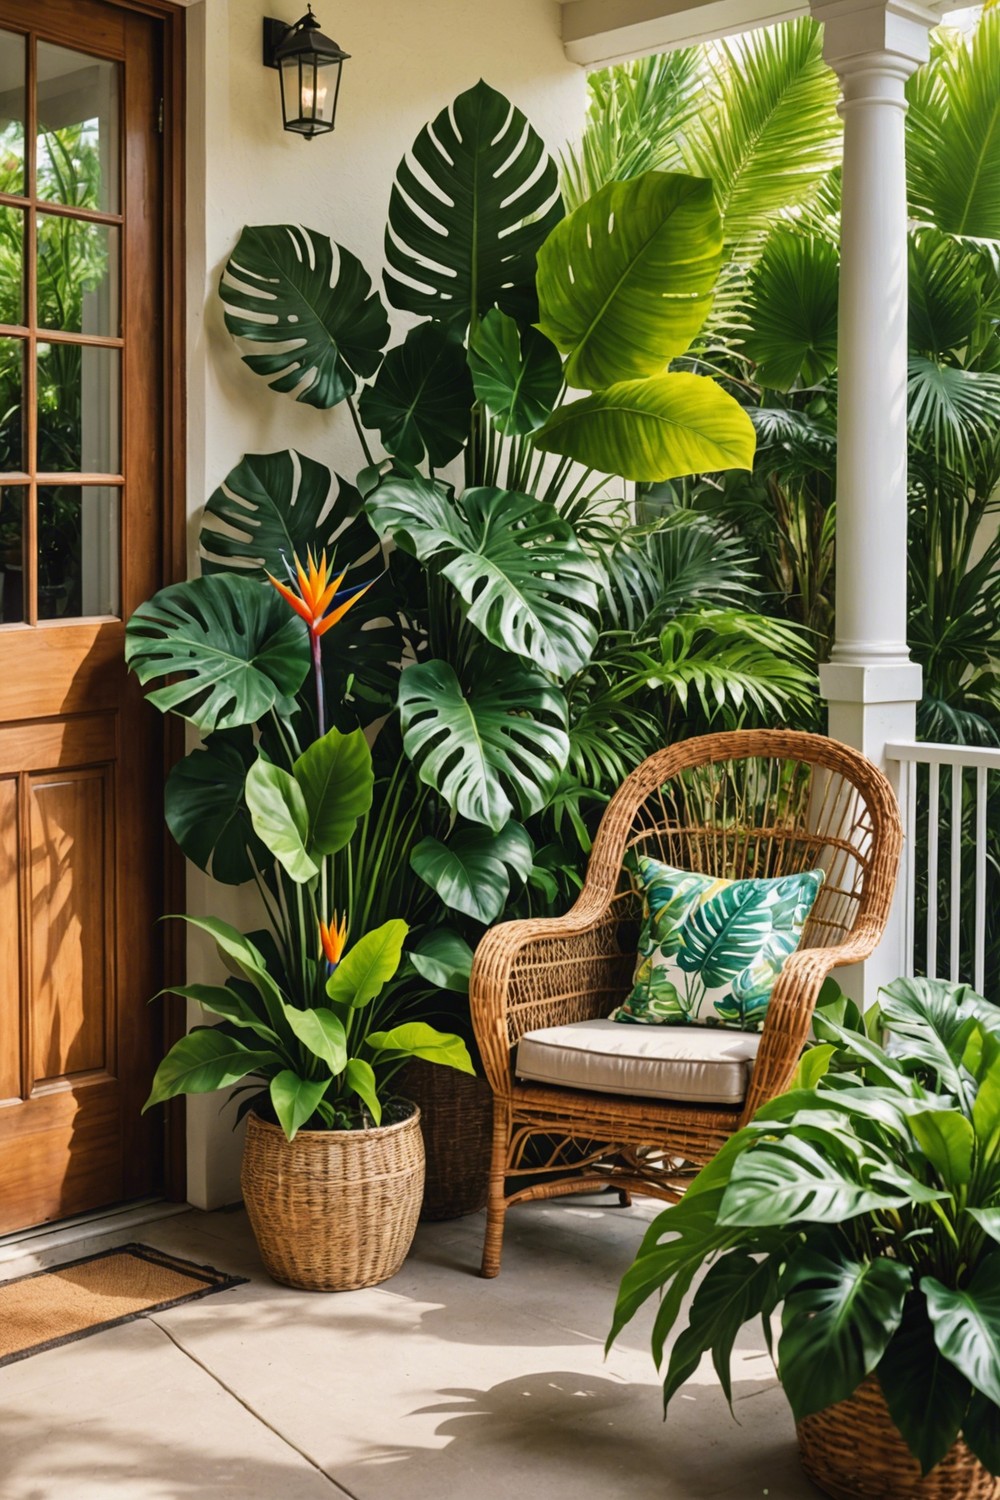 Add a Summer Feel with Tropical Leaves